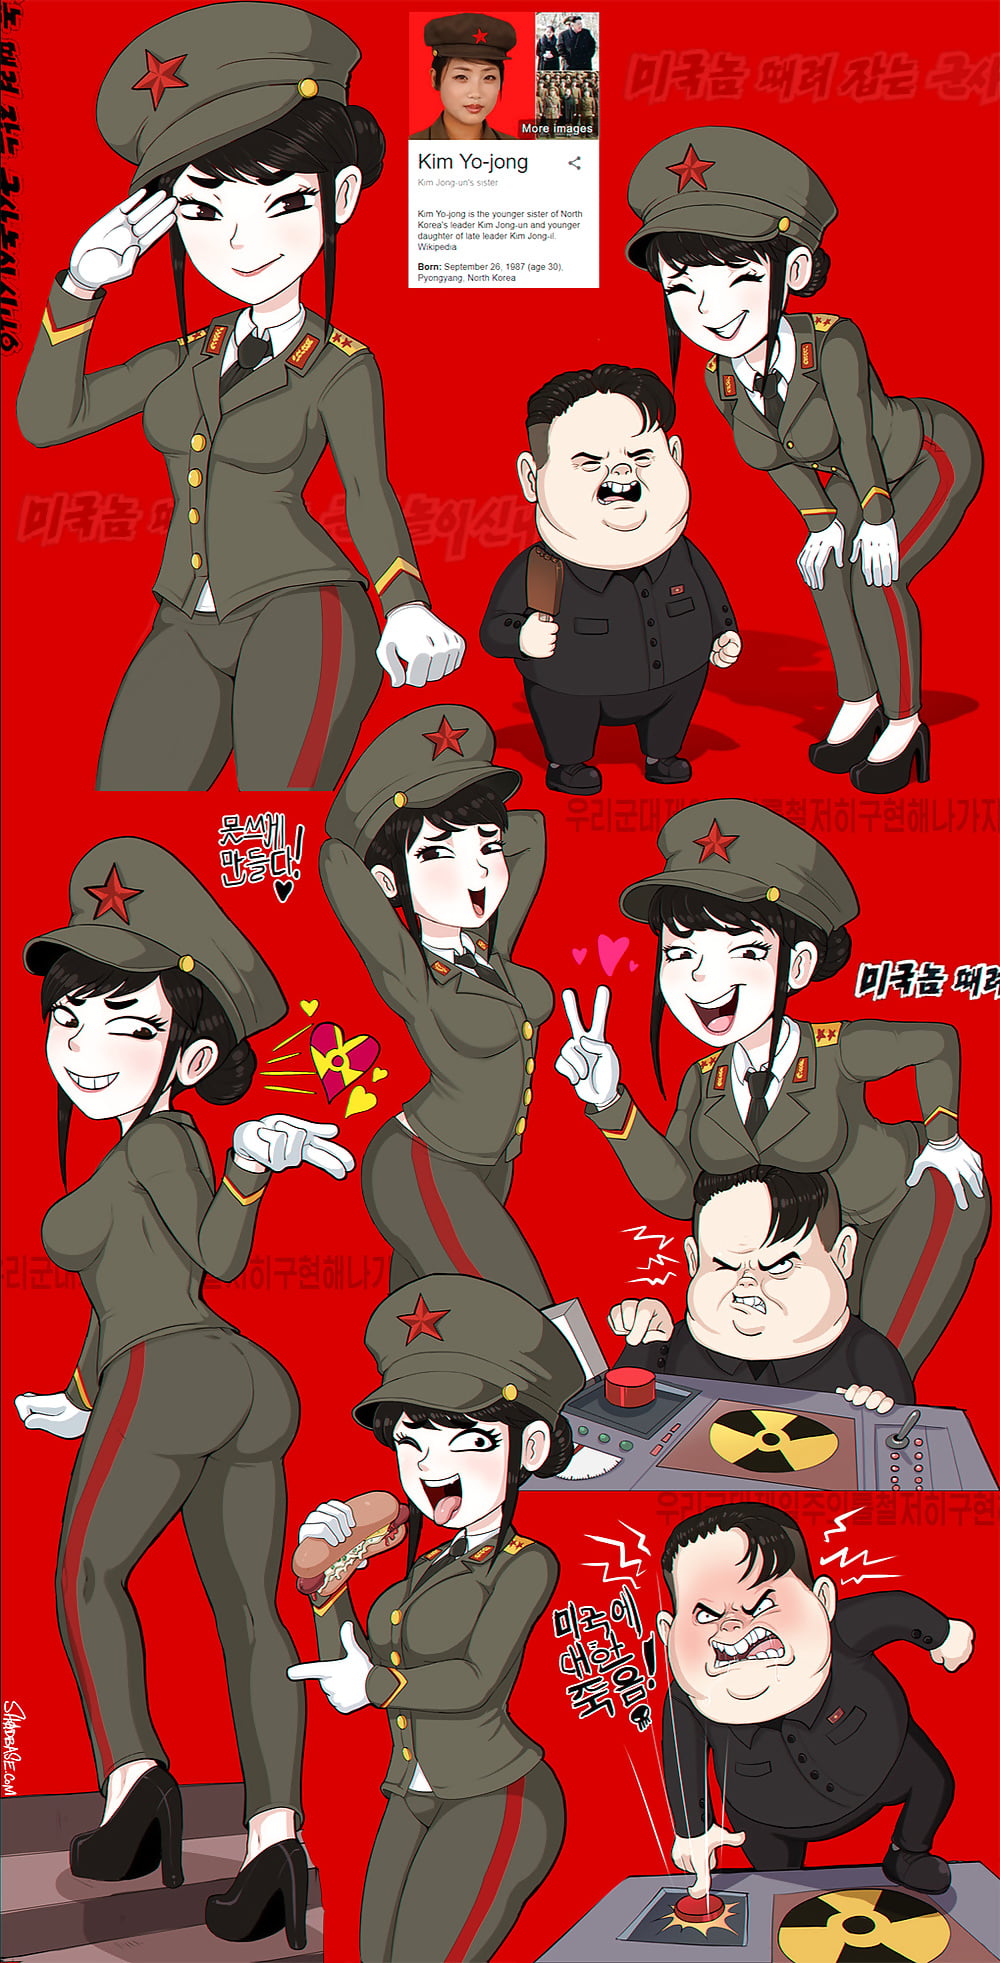 See and Save As north korea porn pict - 4crot.com